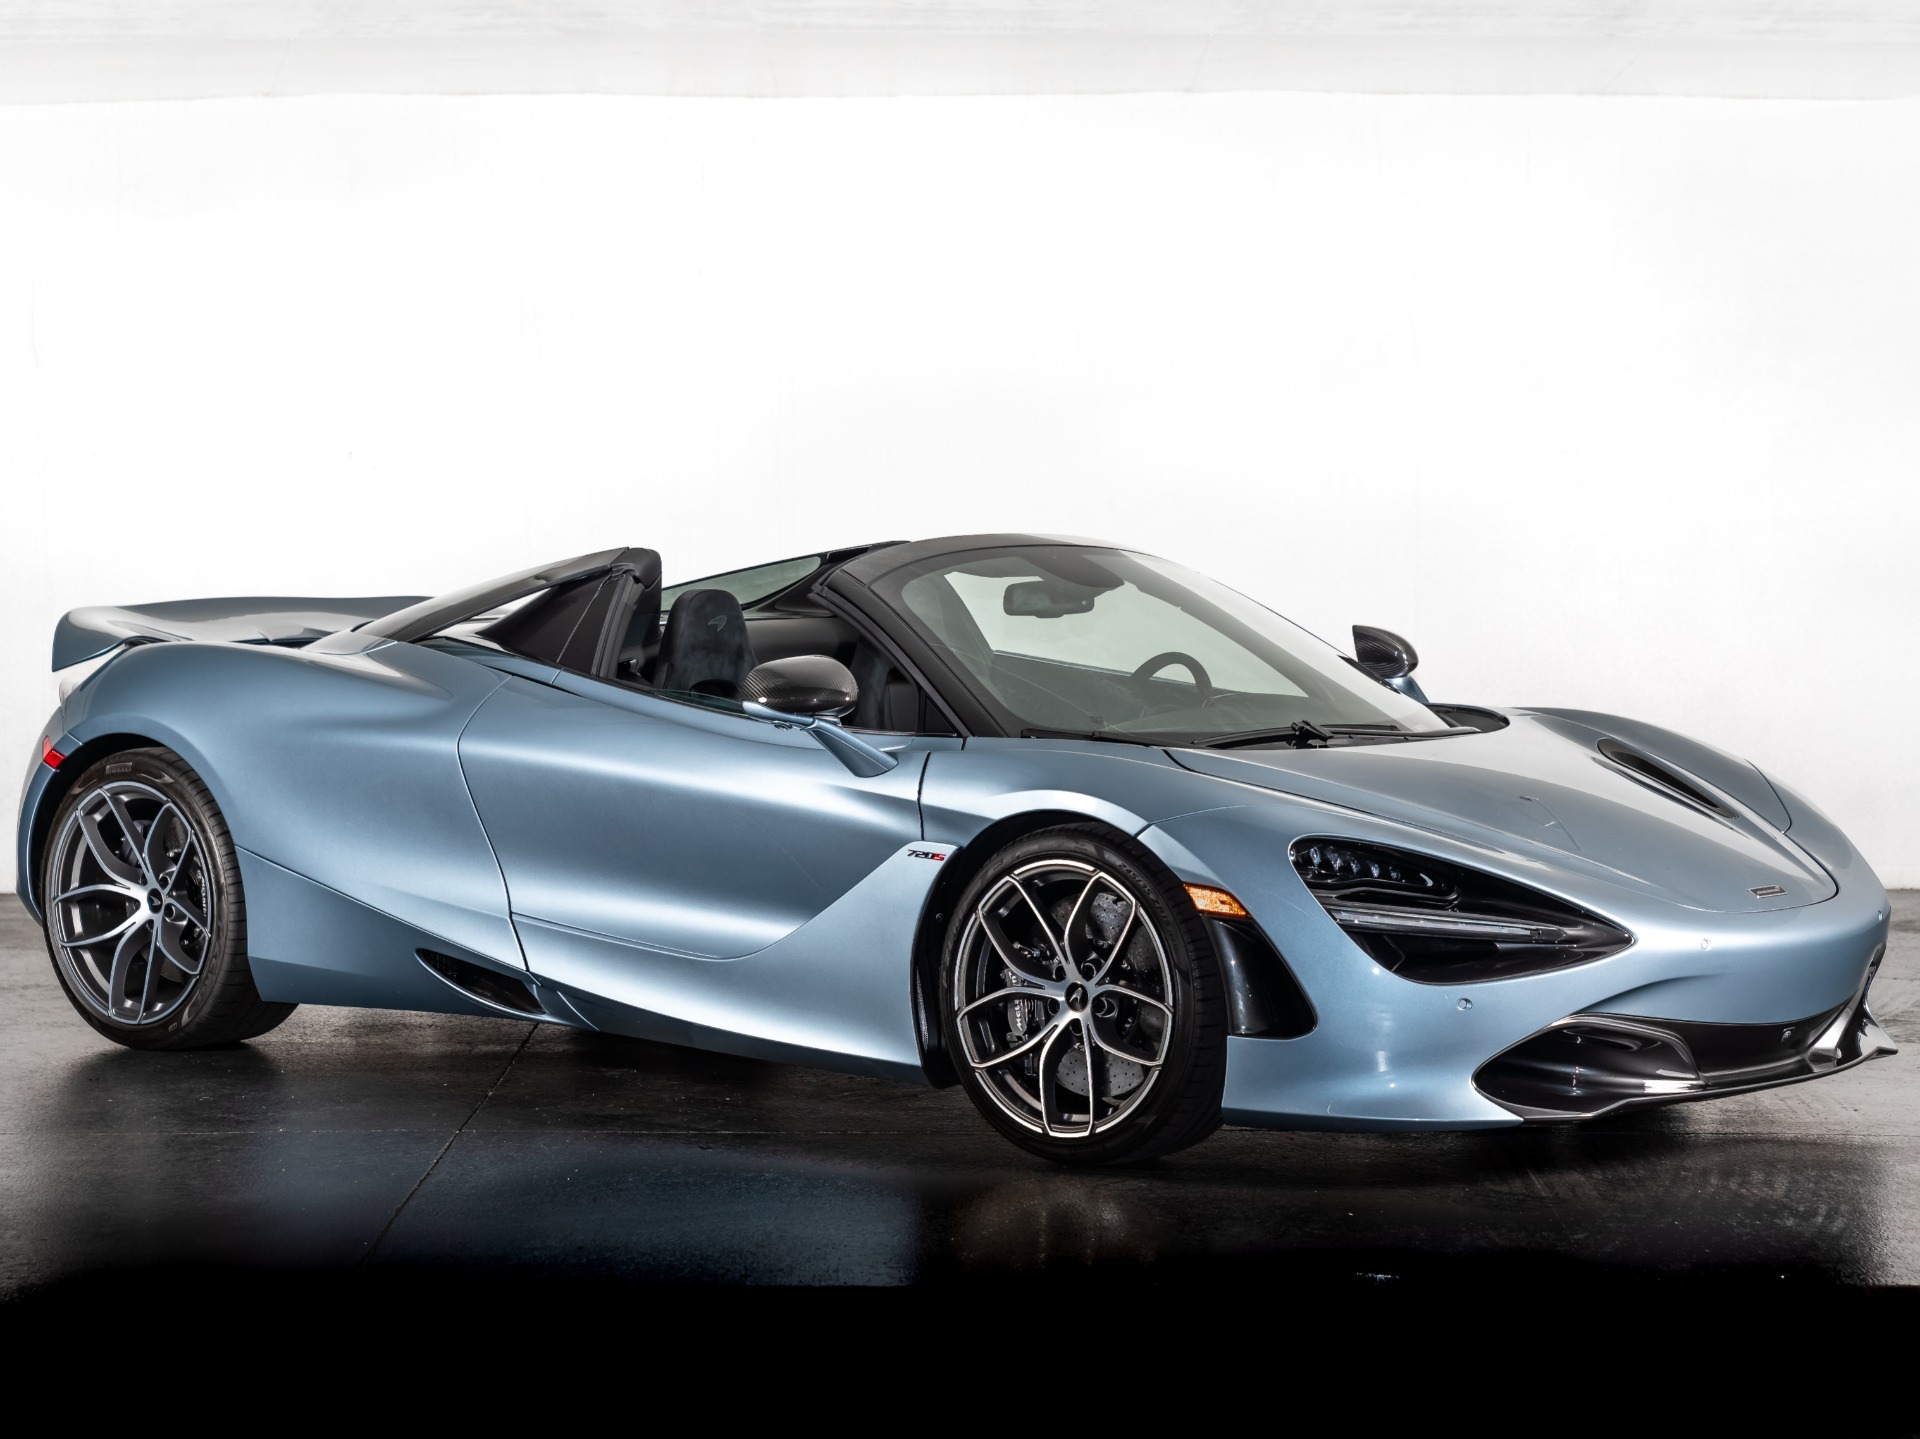 Used 2020 McLaren 720S Spider Performance for sale Sold at McLaren Greenwich in Greenwich CT 06830 1